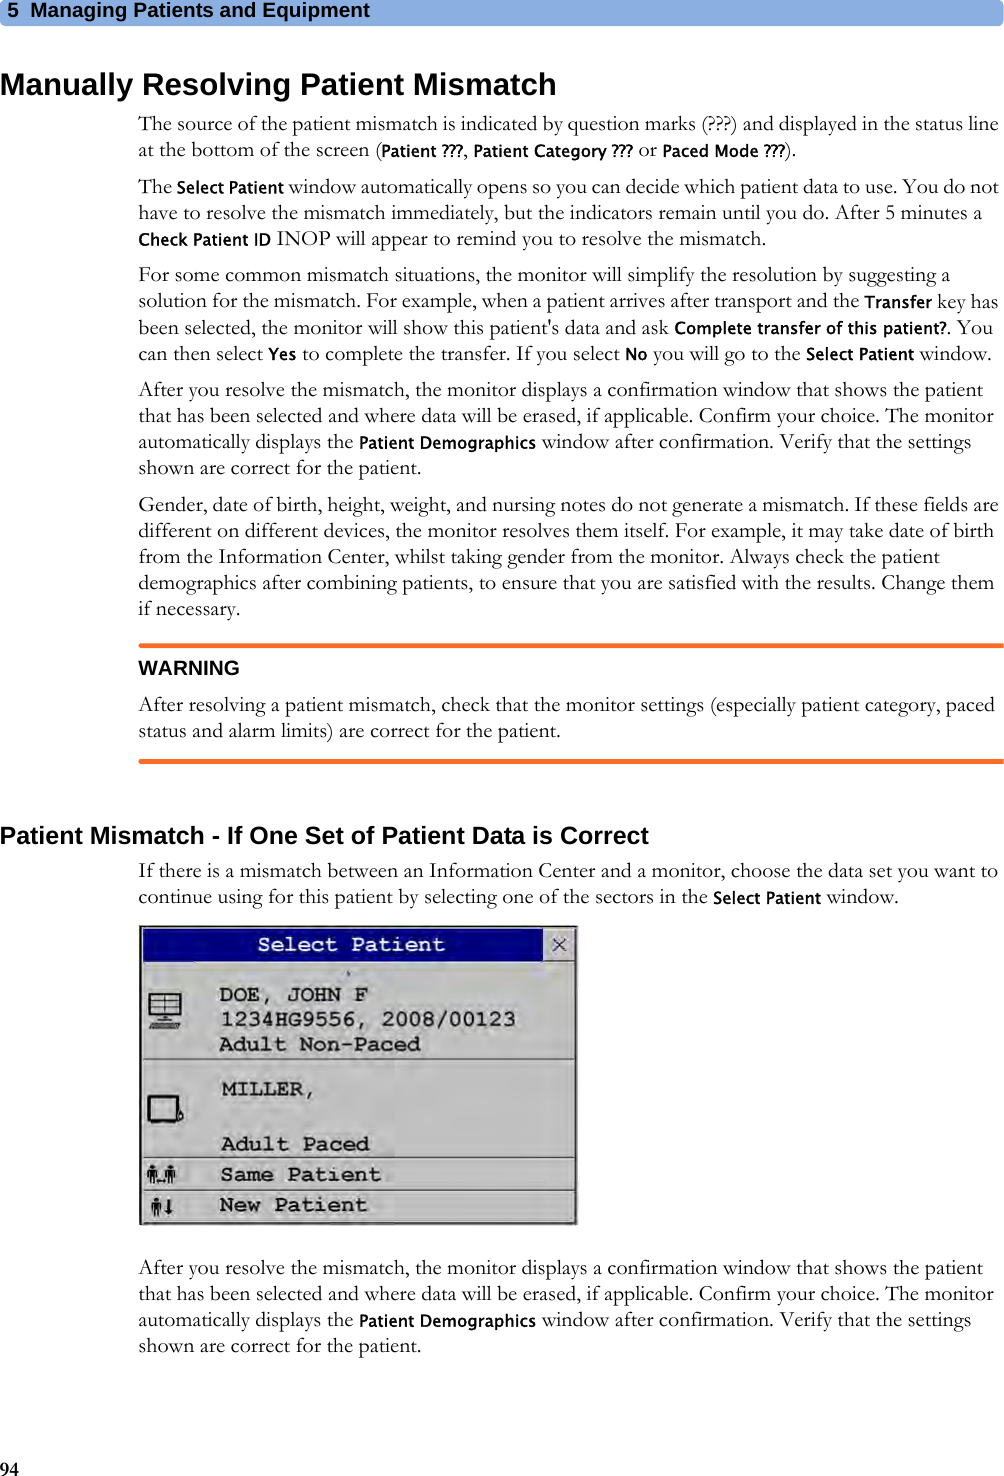 5 Managing Patients and Equipment94Manually Resolving Patient MismatchThe source of the patient mismatch is indicated by question marks (???) and displayed in the status line at the bottom of the screen (Patient ???,Patient Category ??? or Paced Mode ???).The Select Patient window automatically opens so you can decide which patient data to use. You do not have to resolve the mismatch immediately, but the indicators remain until you do. After 5 minutes a Check Patient ID INOP will appear to remind you to resolve the mismatch.For some common mismatch situations, the monitor will simplify the resolution by suggesting a solution for the mismatch. For example, when a patient arrives after transport and the Transfer key has been selected, the monitor will show this patient&apos;s data and ask Complete transfer of this patient?. You can then select Yes to complete the transfer. If you select No you will go to the Select Patient window.After you resolve the mismatch, the monitor displays a confirmation window that shows the patient that has been selected and where data will be erased, if applicable. Confirm your choice. The monitor automatically displays the Patient Demographics window after confirmation. Verify that the settings shown are correct for the patient.Gender, date of birth, height, weight, and nursing notes do not generate a mismatch. If these fields are different on different devices, the monitor resolves them itself. For example, it may take date of birth from the Information Center, whilst taking gender from the monitor. Always check the patient demographics after combining patients, to ensure that you are satisfied with the results. Change them if necessary.WARNINGAfter resolving a patient mismatch, check that the monitor settings (especially patient category, paced status and alarm limits) are correct for the patient.Patient Mismatch - If One Set of Patient Data is CorrectIf there is a mismatch between an Information Center and a monitor, choose the data set you want to continue using for this patient by selecting one of the sectors in the Select Patient window.After you resolve the mismatch, the monitor displays a confirmation window that shows the patient that has been selected and where data will be erased, if applicable. Confirm your choice. The monitor automatically displays the Patient Demographics window after confirmation. Verify that the settings shown are correct for the patient.